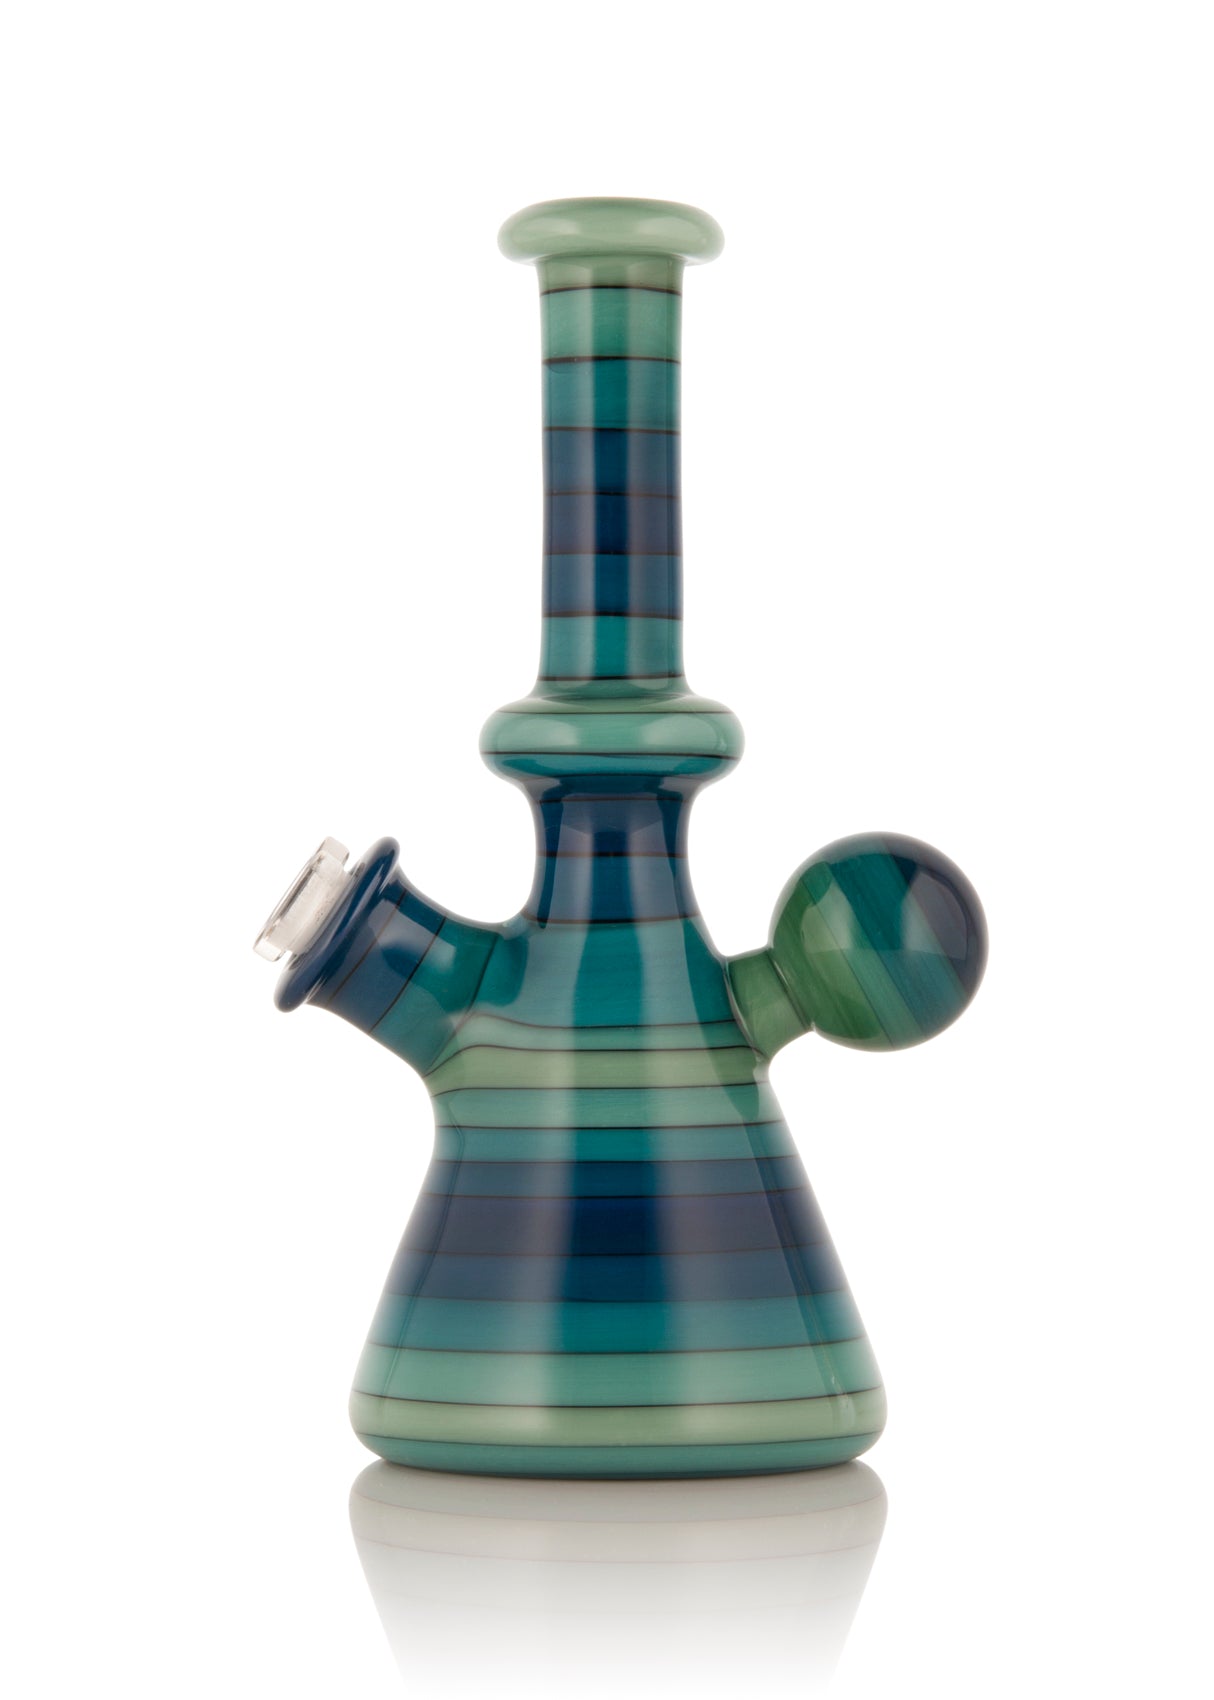 Encalmo Jammer in Aqua and Blue Mini Vapor Tube by Rone